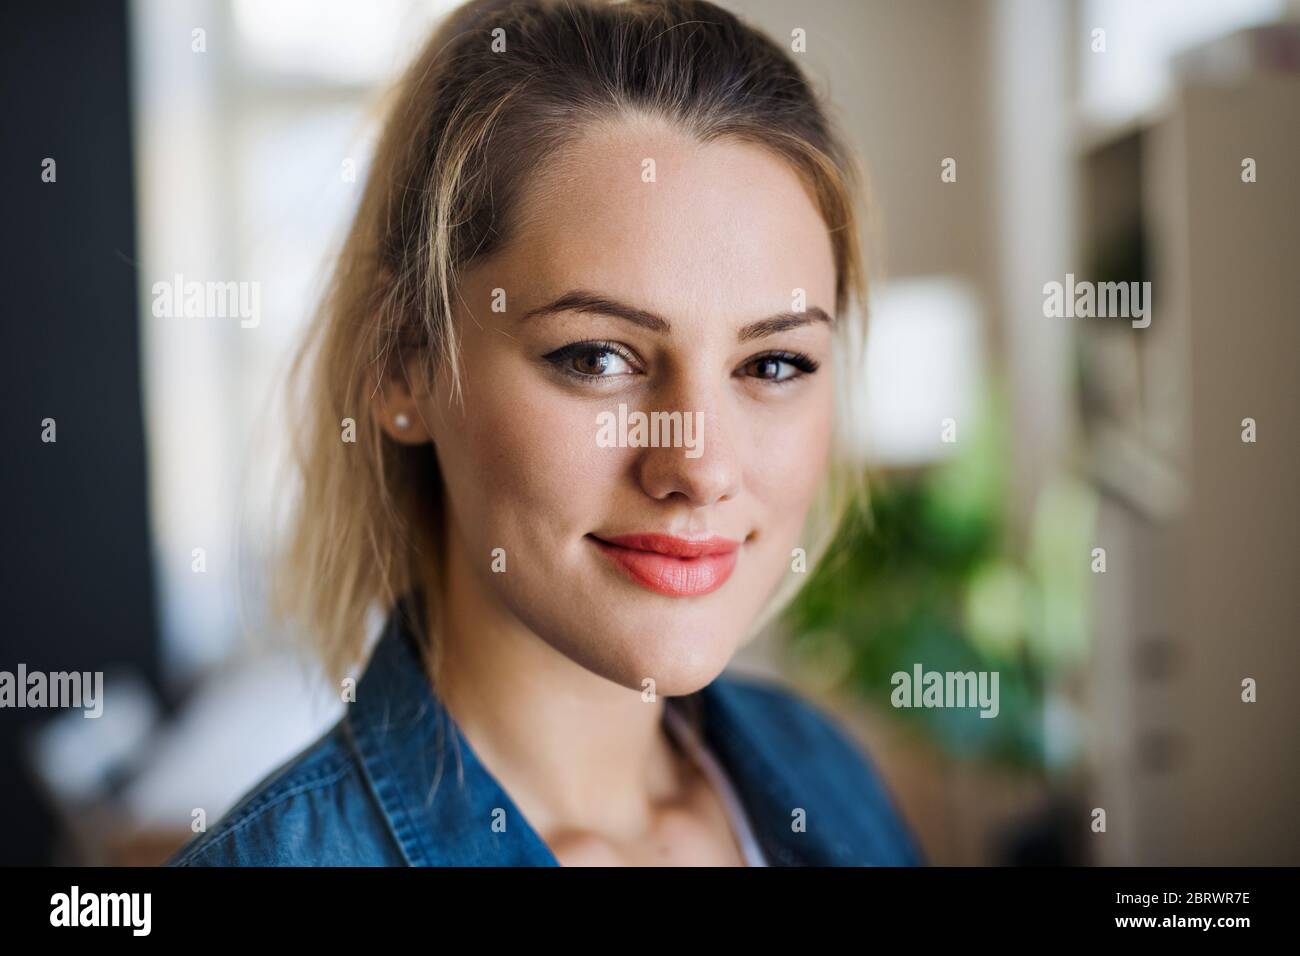 Close-up portrait of happy young woman indoors at home. Stock Photo